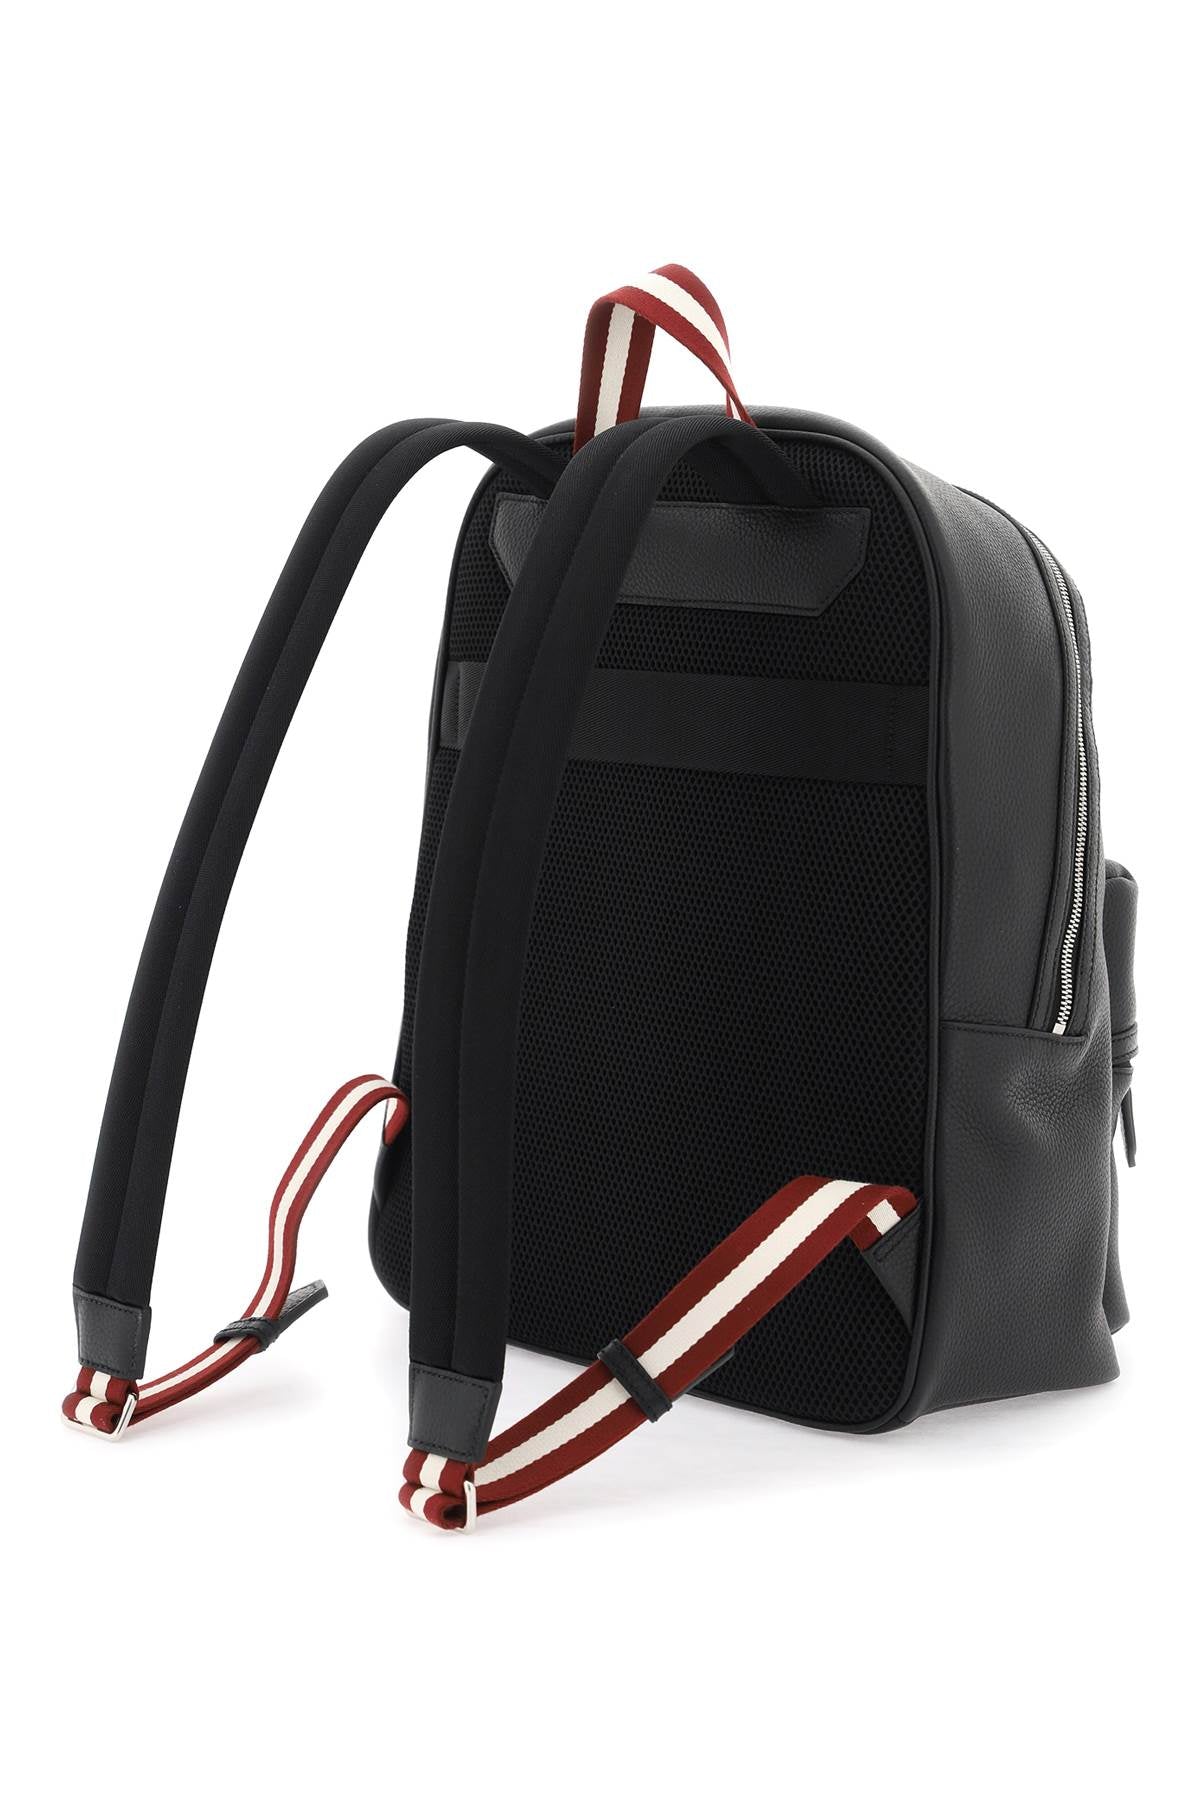 Luxurious and Sleek Black Leather Backpack for Men